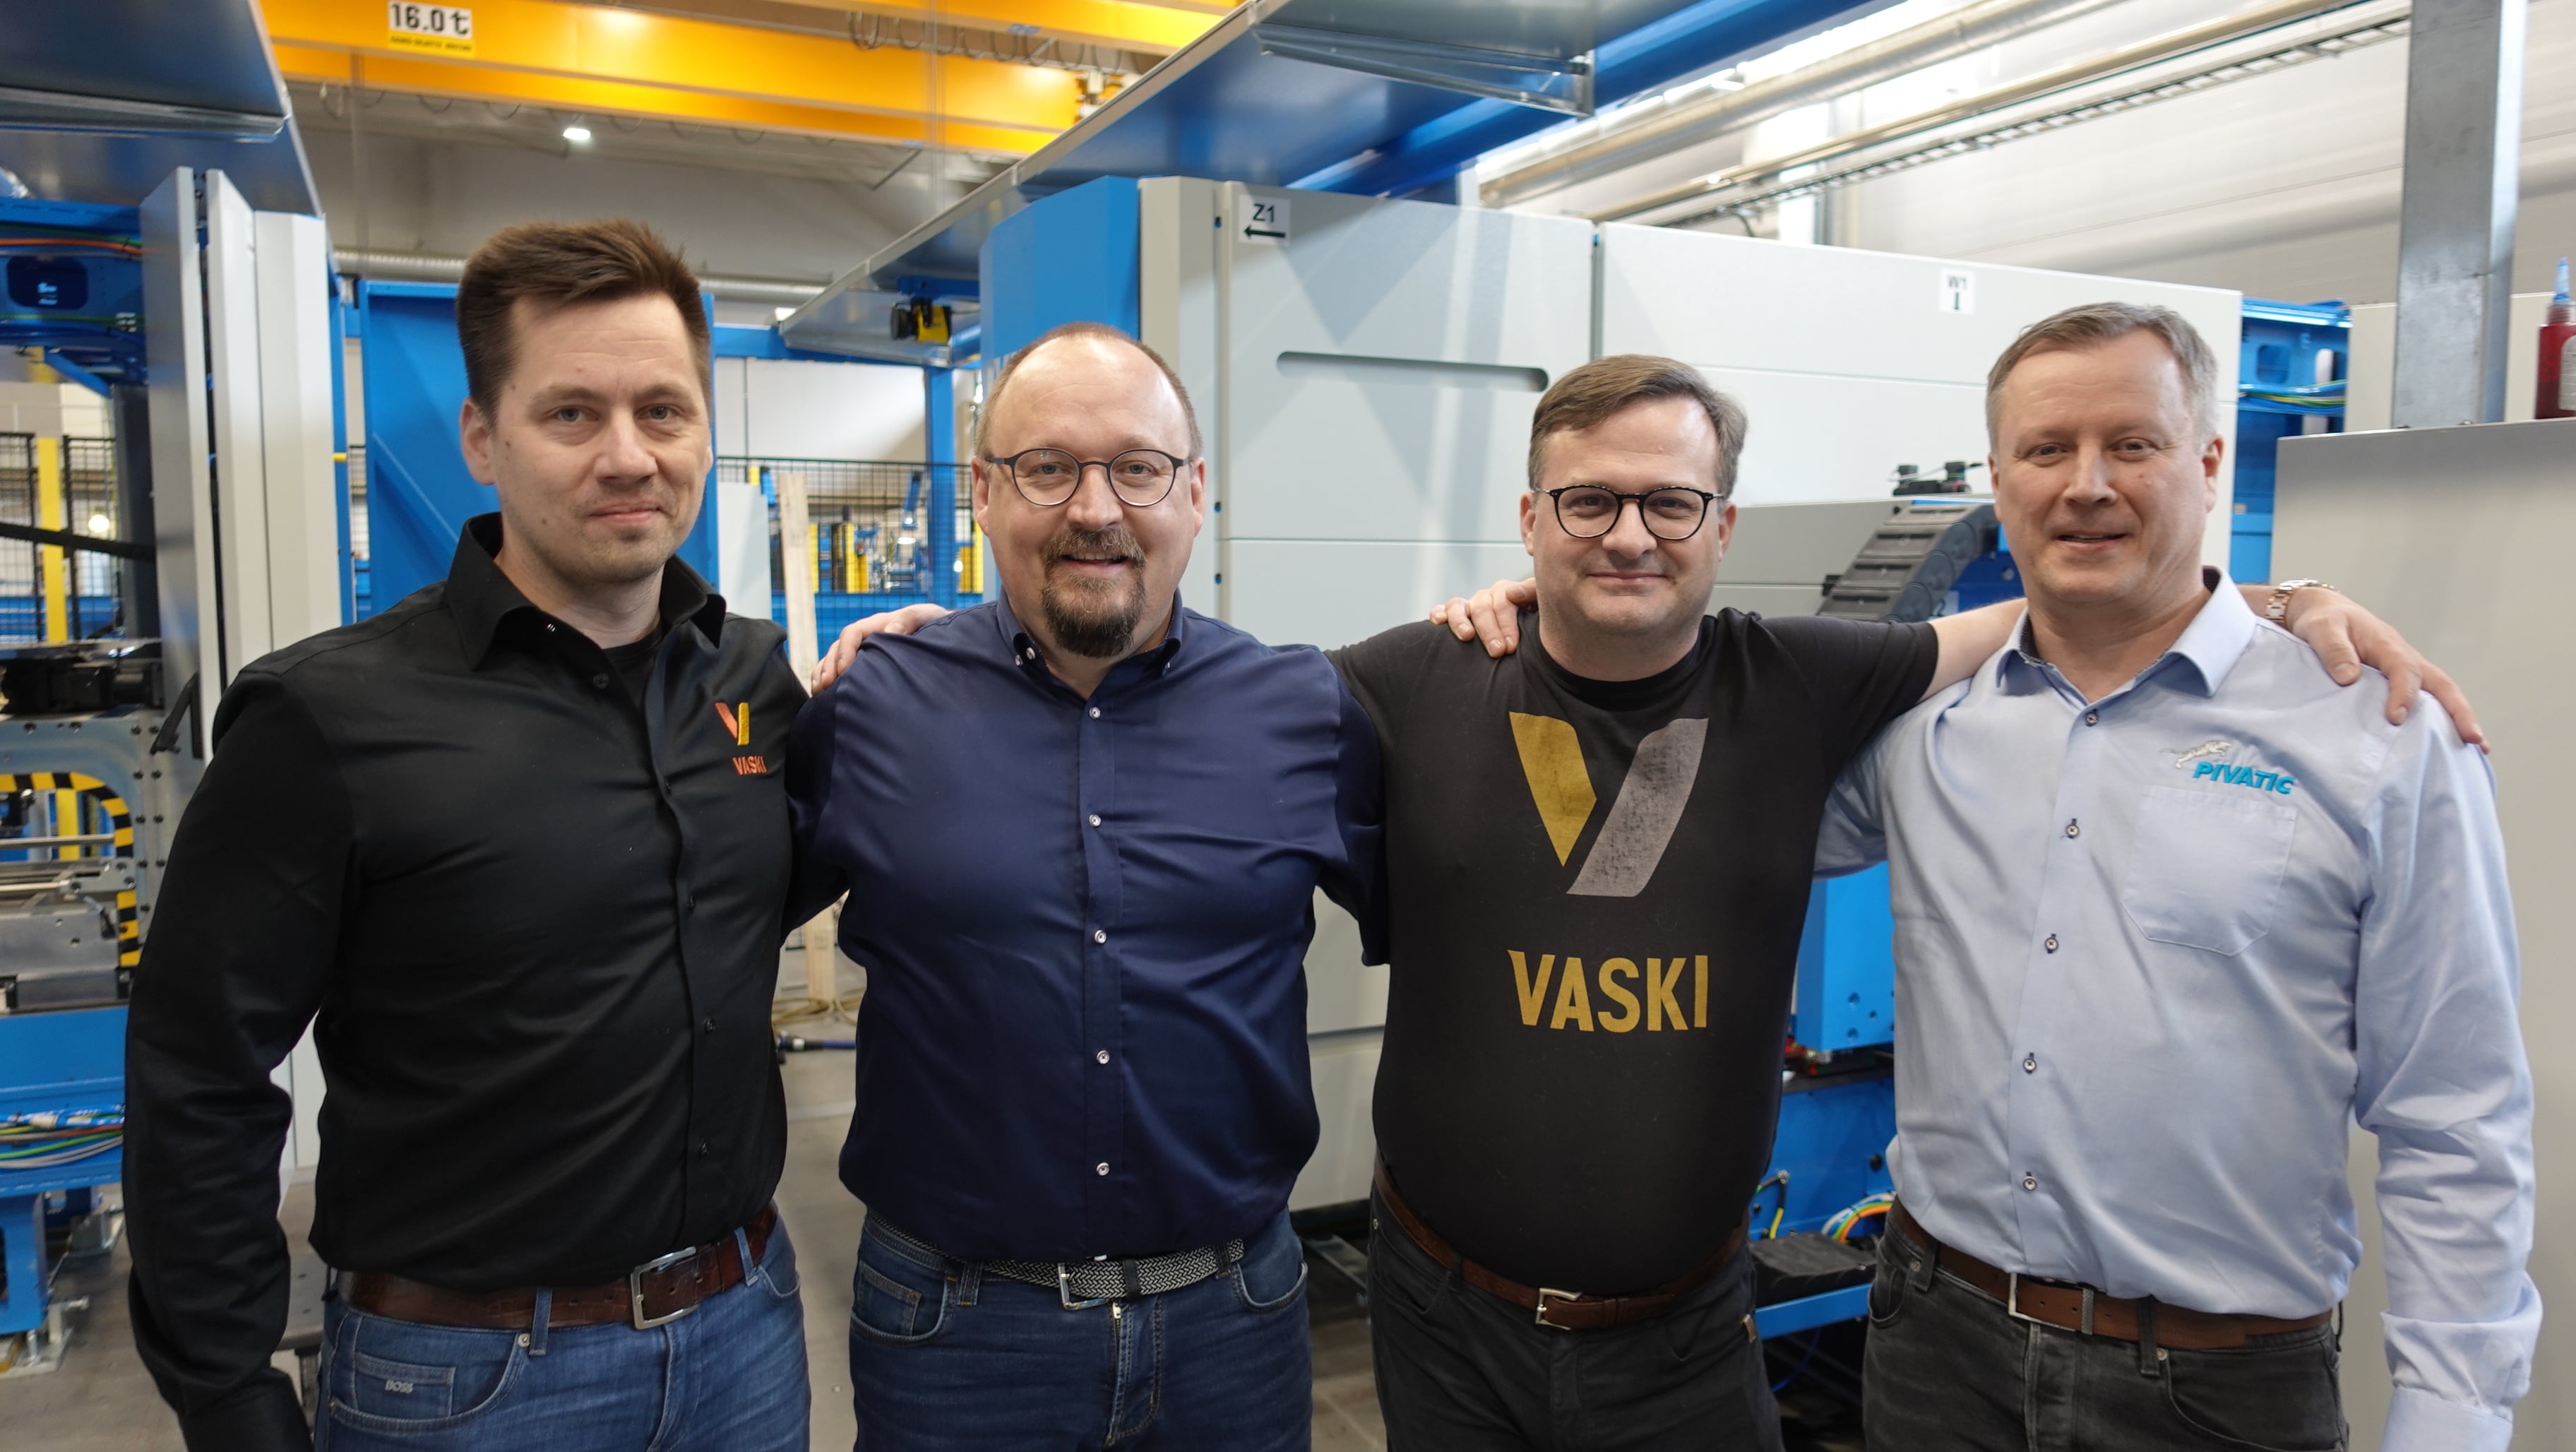 Vaski Group Oy expands its operations with the acquisition of Pivatic Oy